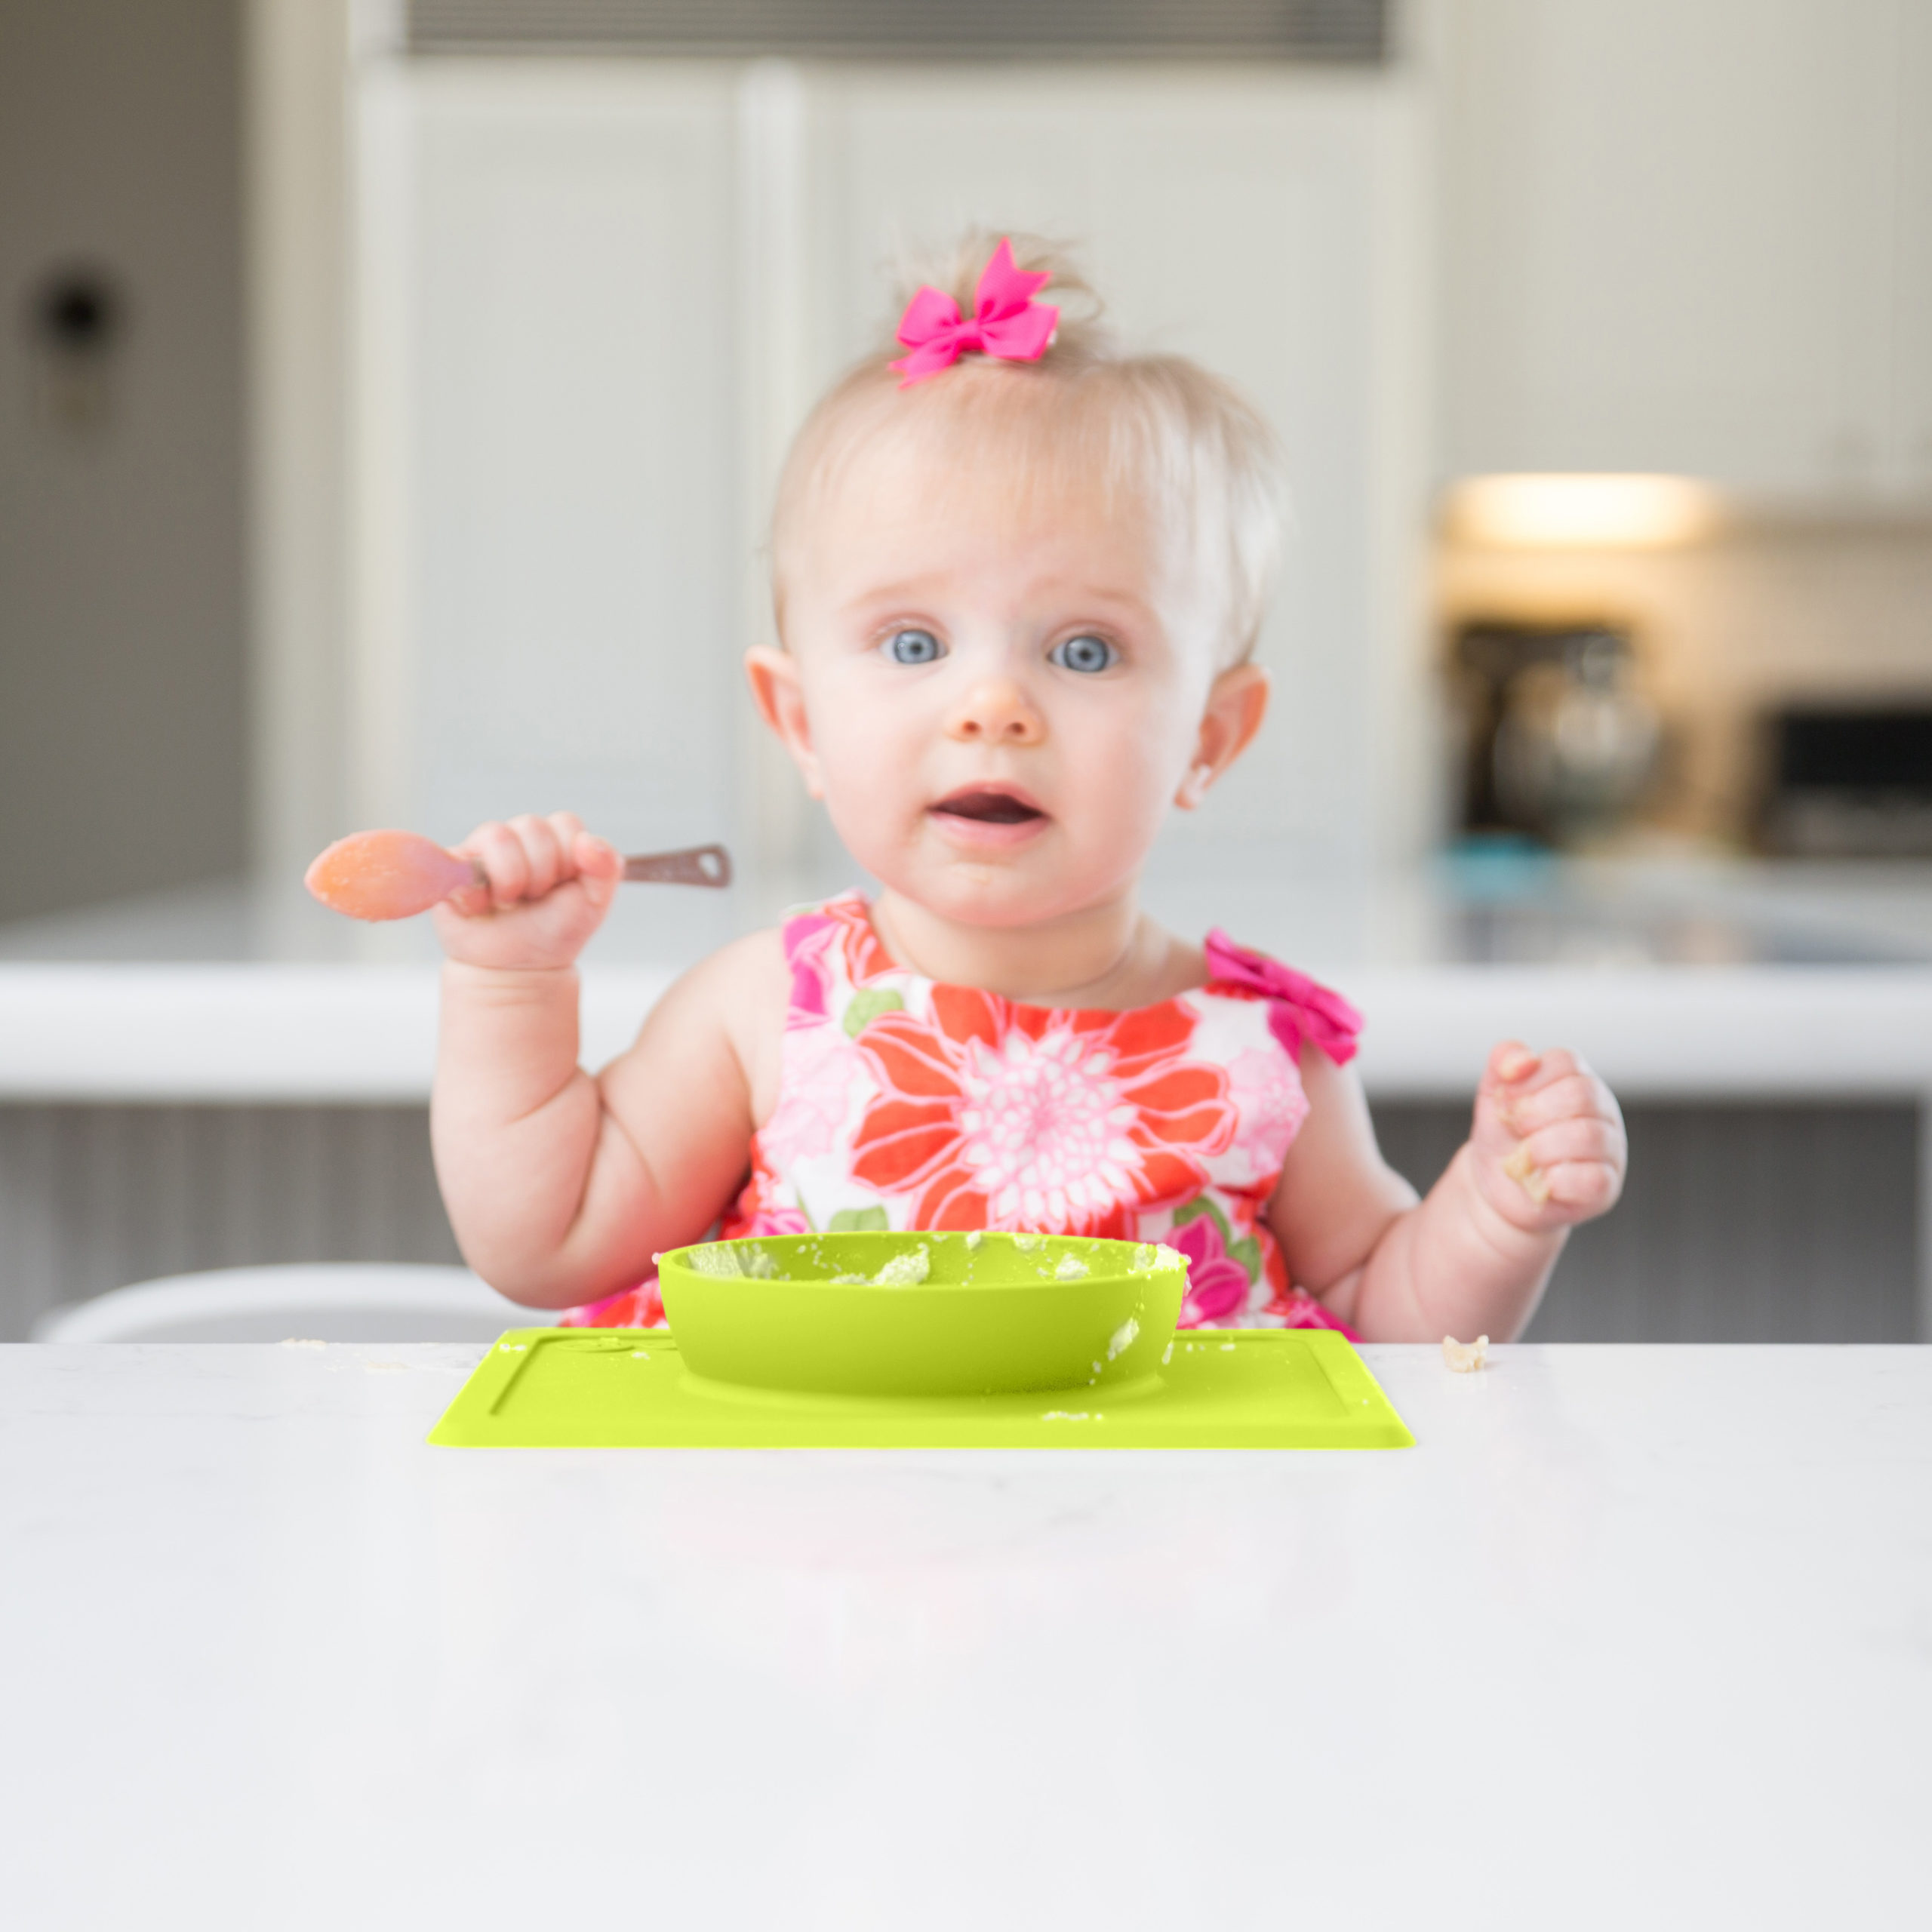 little girl clutching a spoon, eating from an ezpz mini bowl in lime